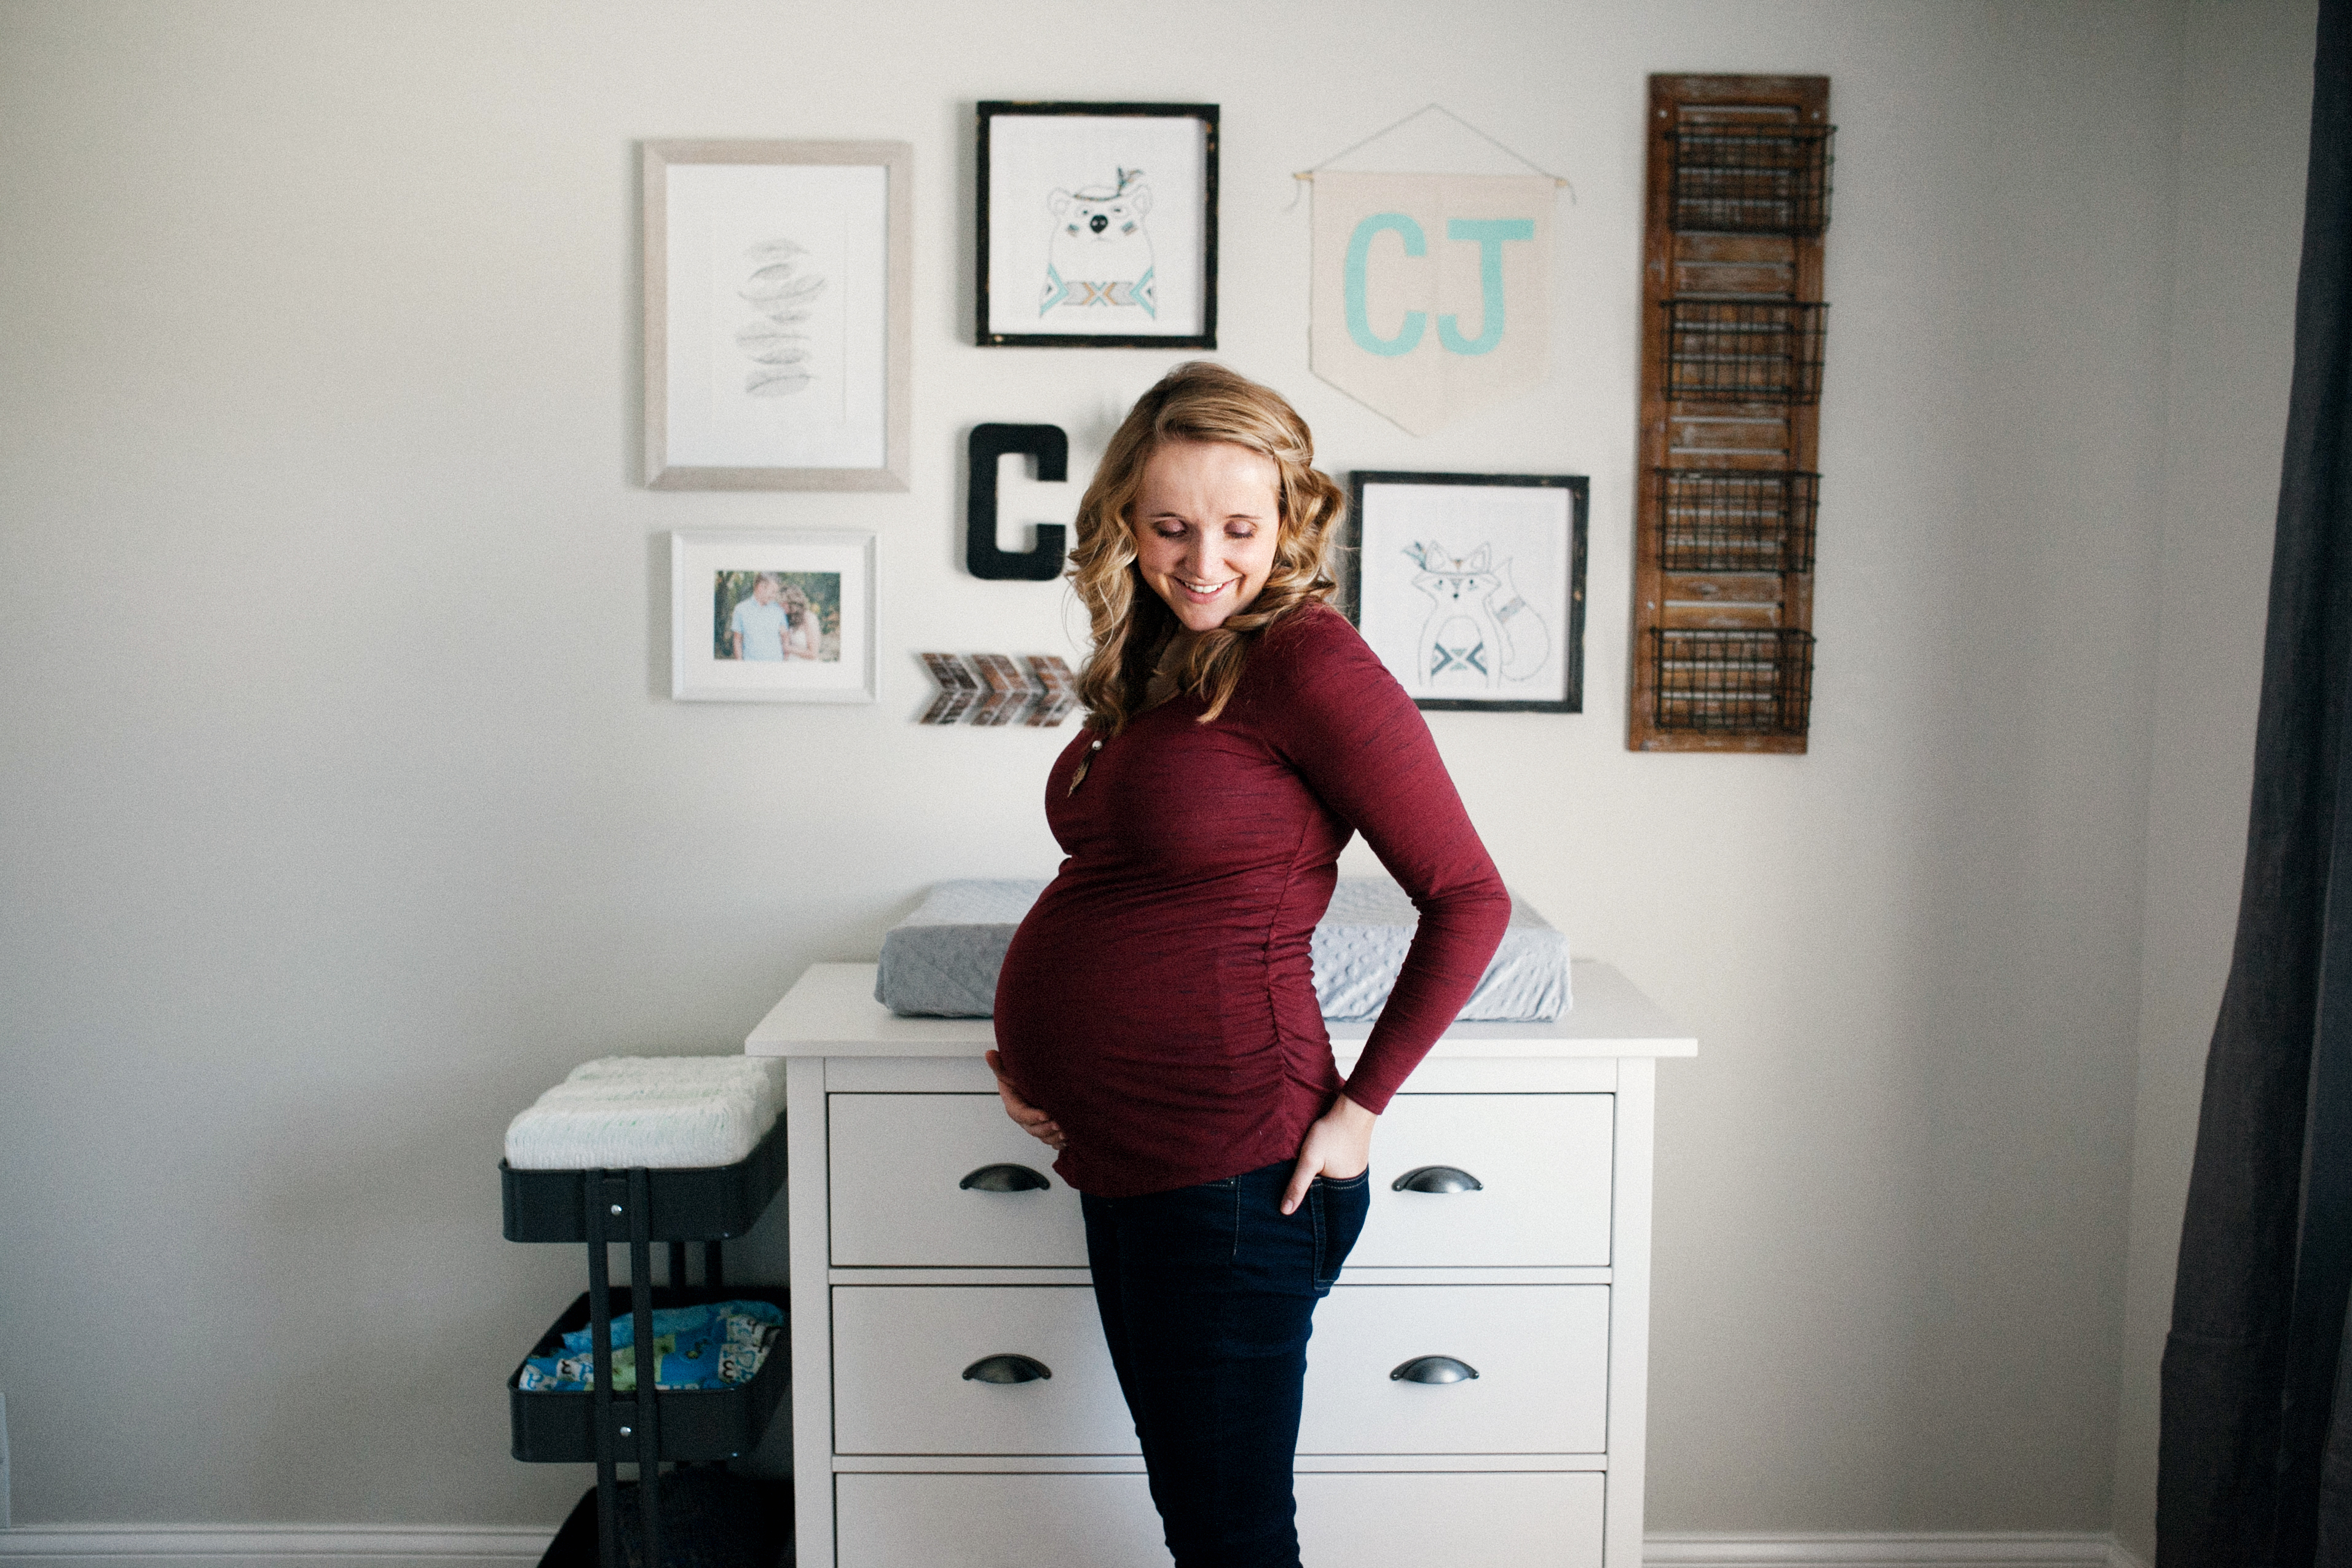 Eight Month Pregnancy Update Bump and Gallery Wall